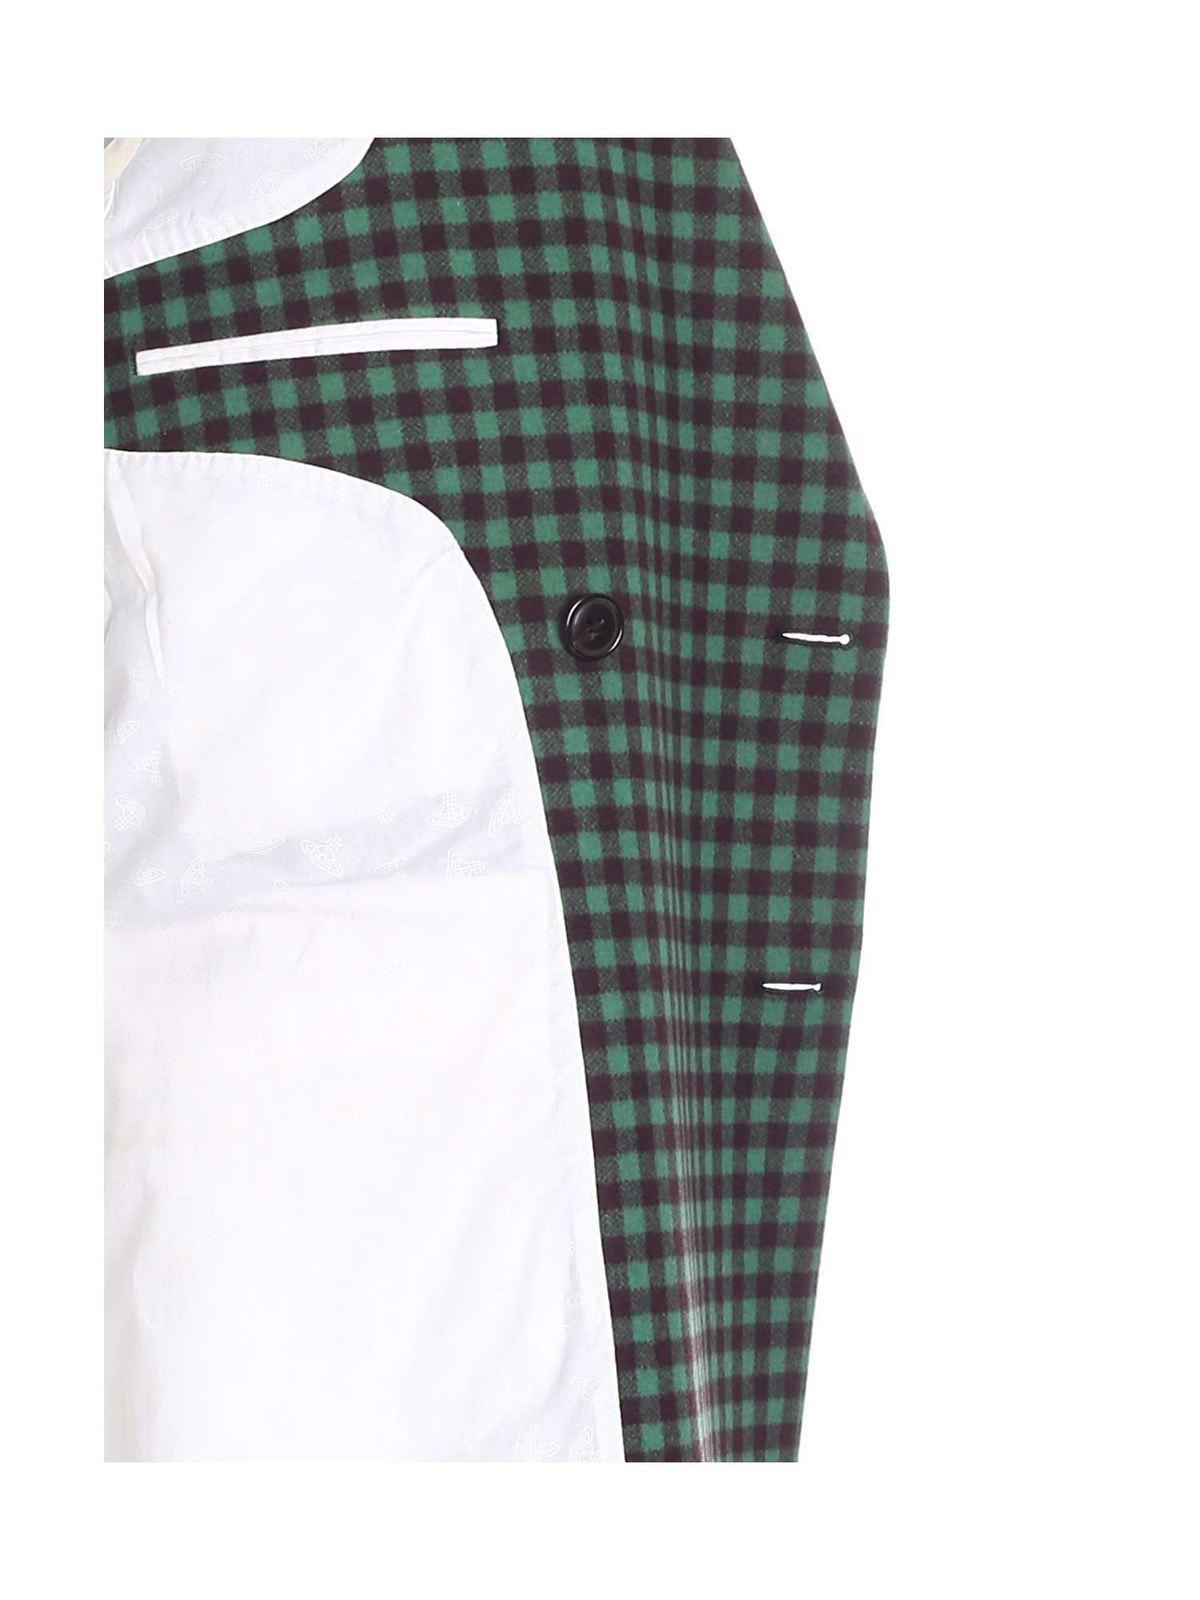 Shop Vivienne Westwood Mini Check Melton Coat In Green And Blue In Verde